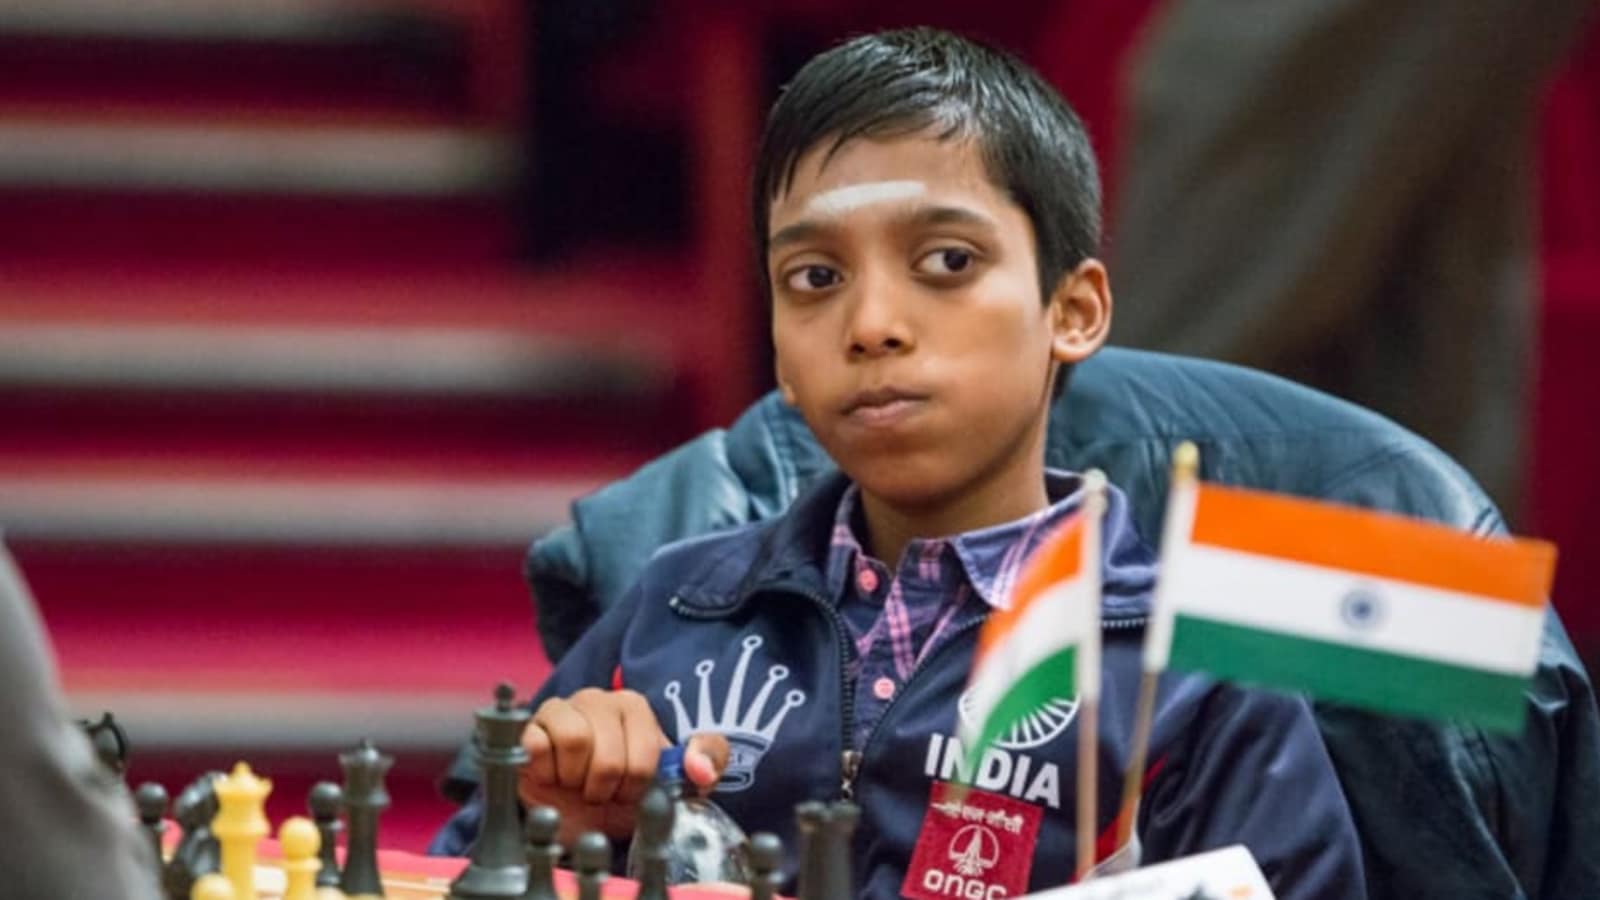 Meet power-packed siblings Praggnanandhaa, Vaishali - Chess champions from  India; Pragg to face World No. 1 Magnus Carlsen in FIDE World Cup 2023